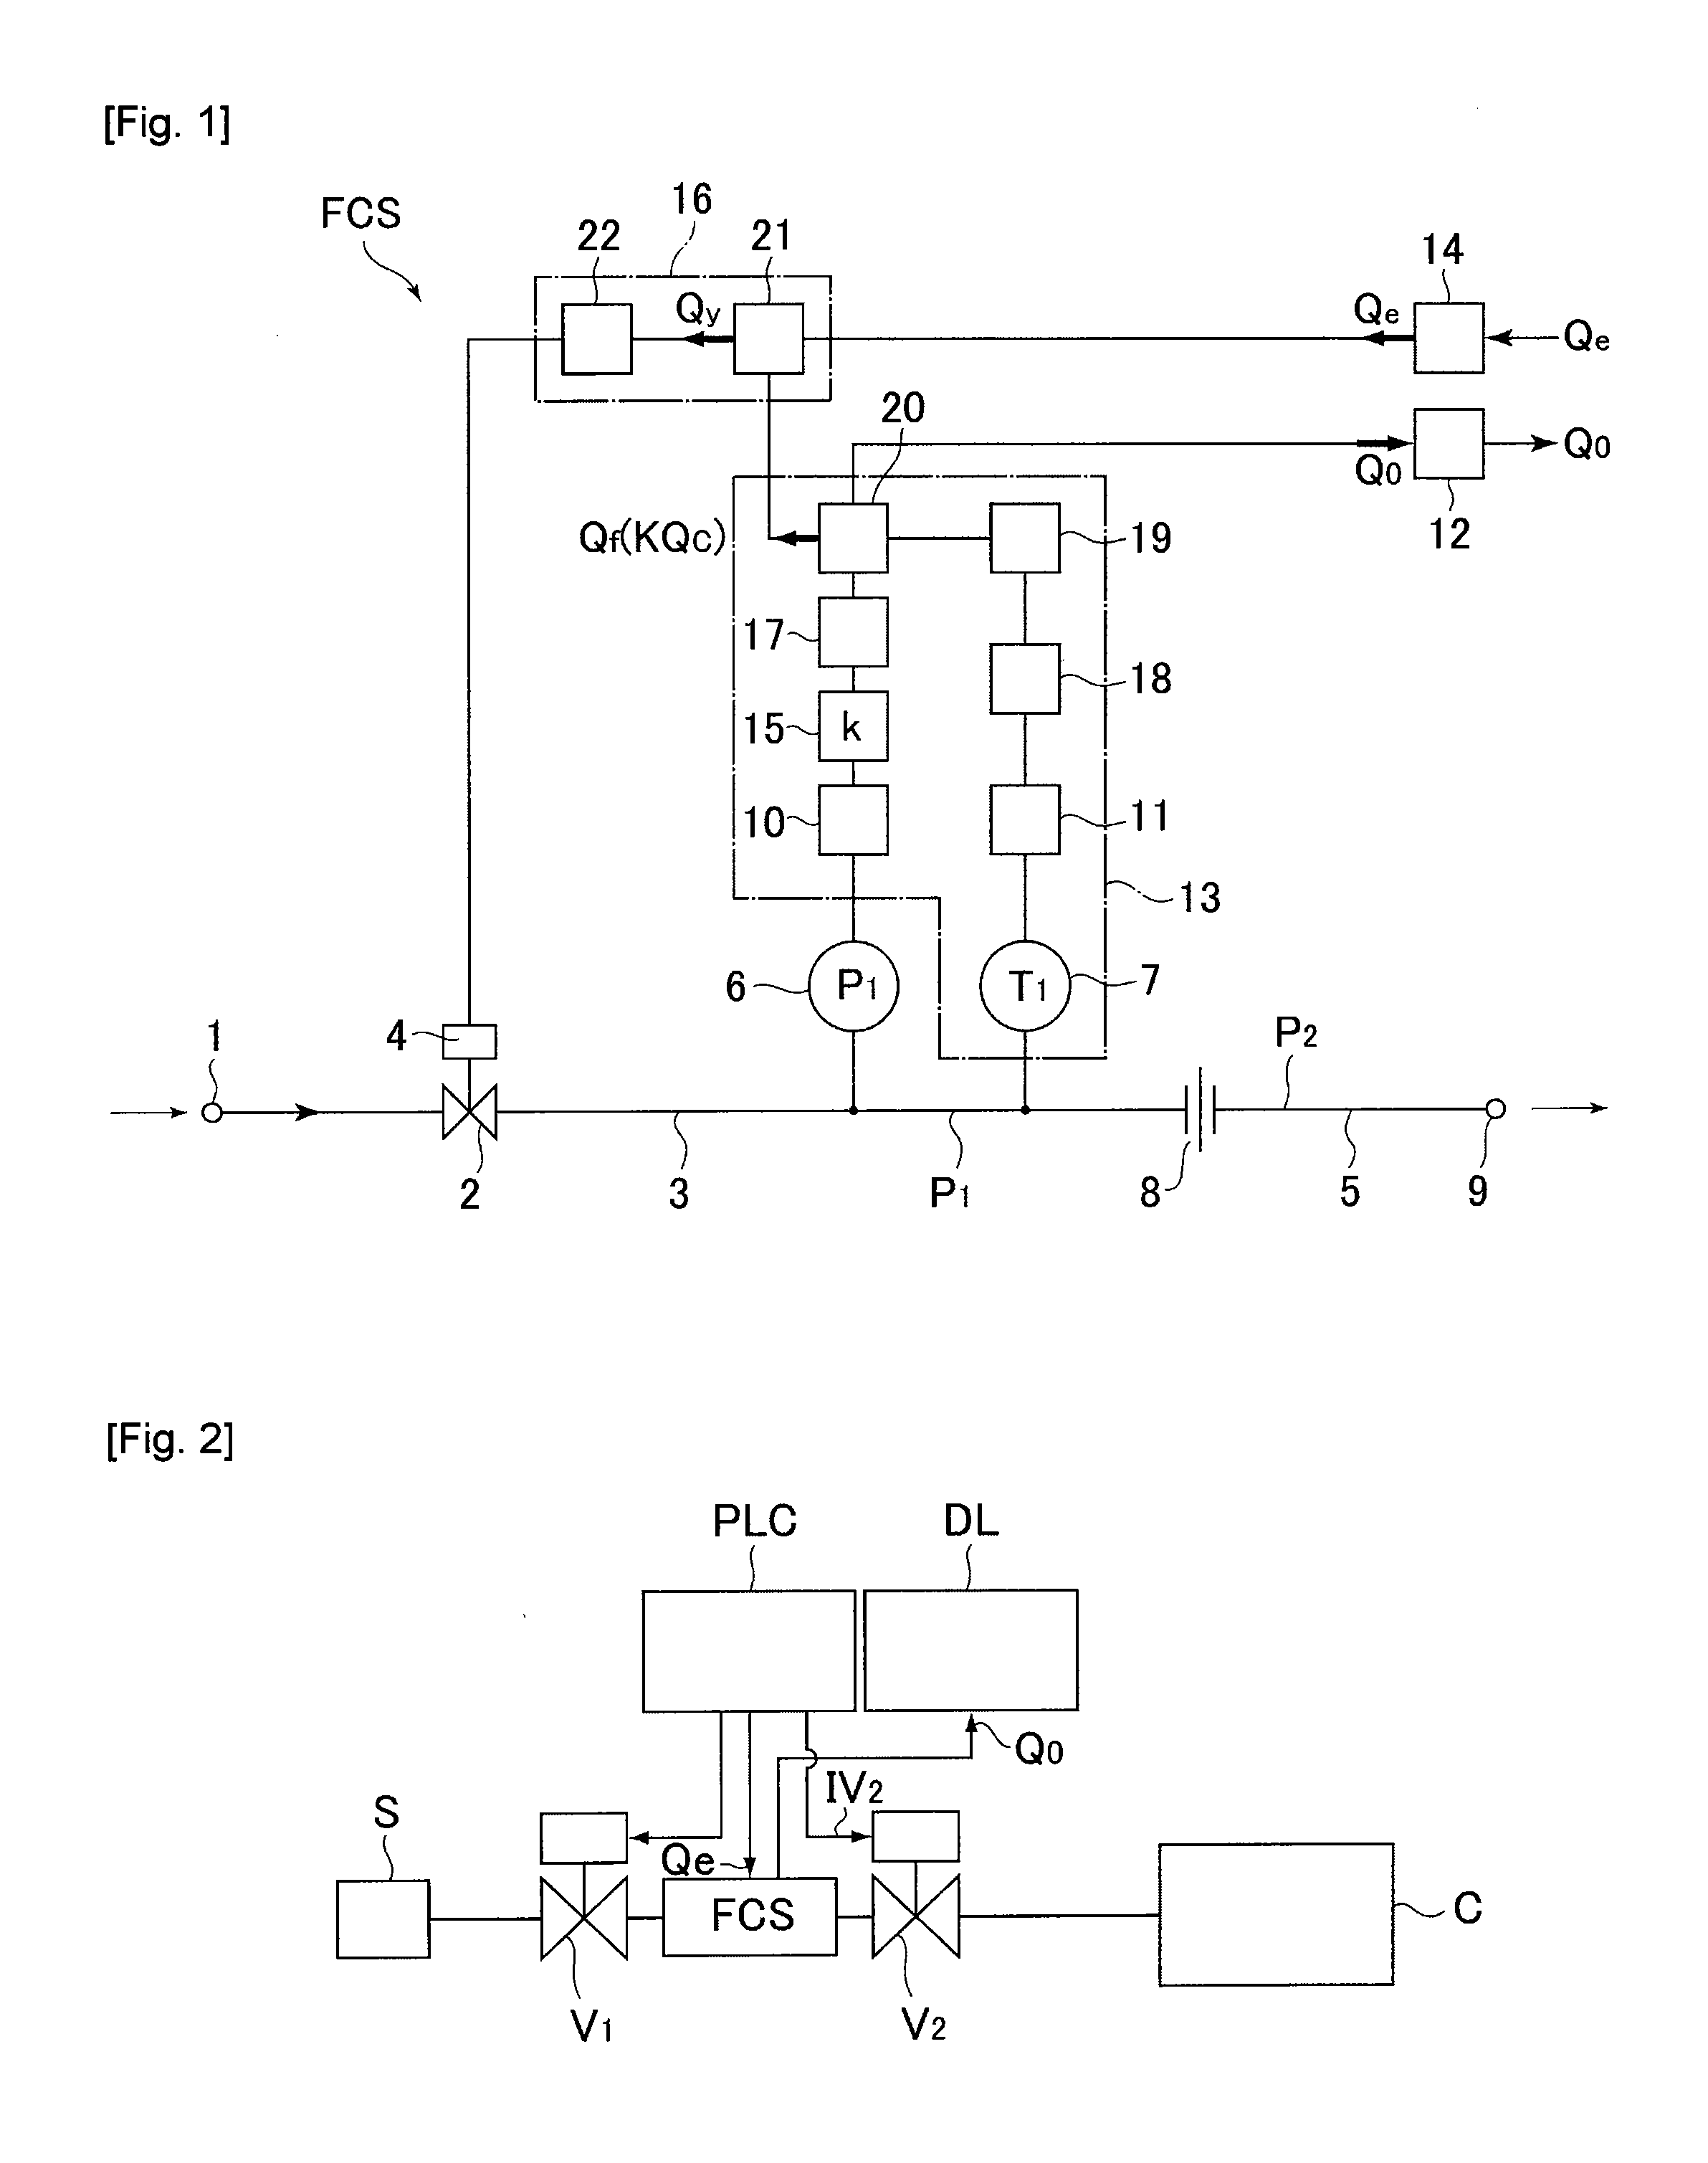 Method for detecting malfunction of valve on the downstream side of throttle mechanism of pressure type flow control apparatus